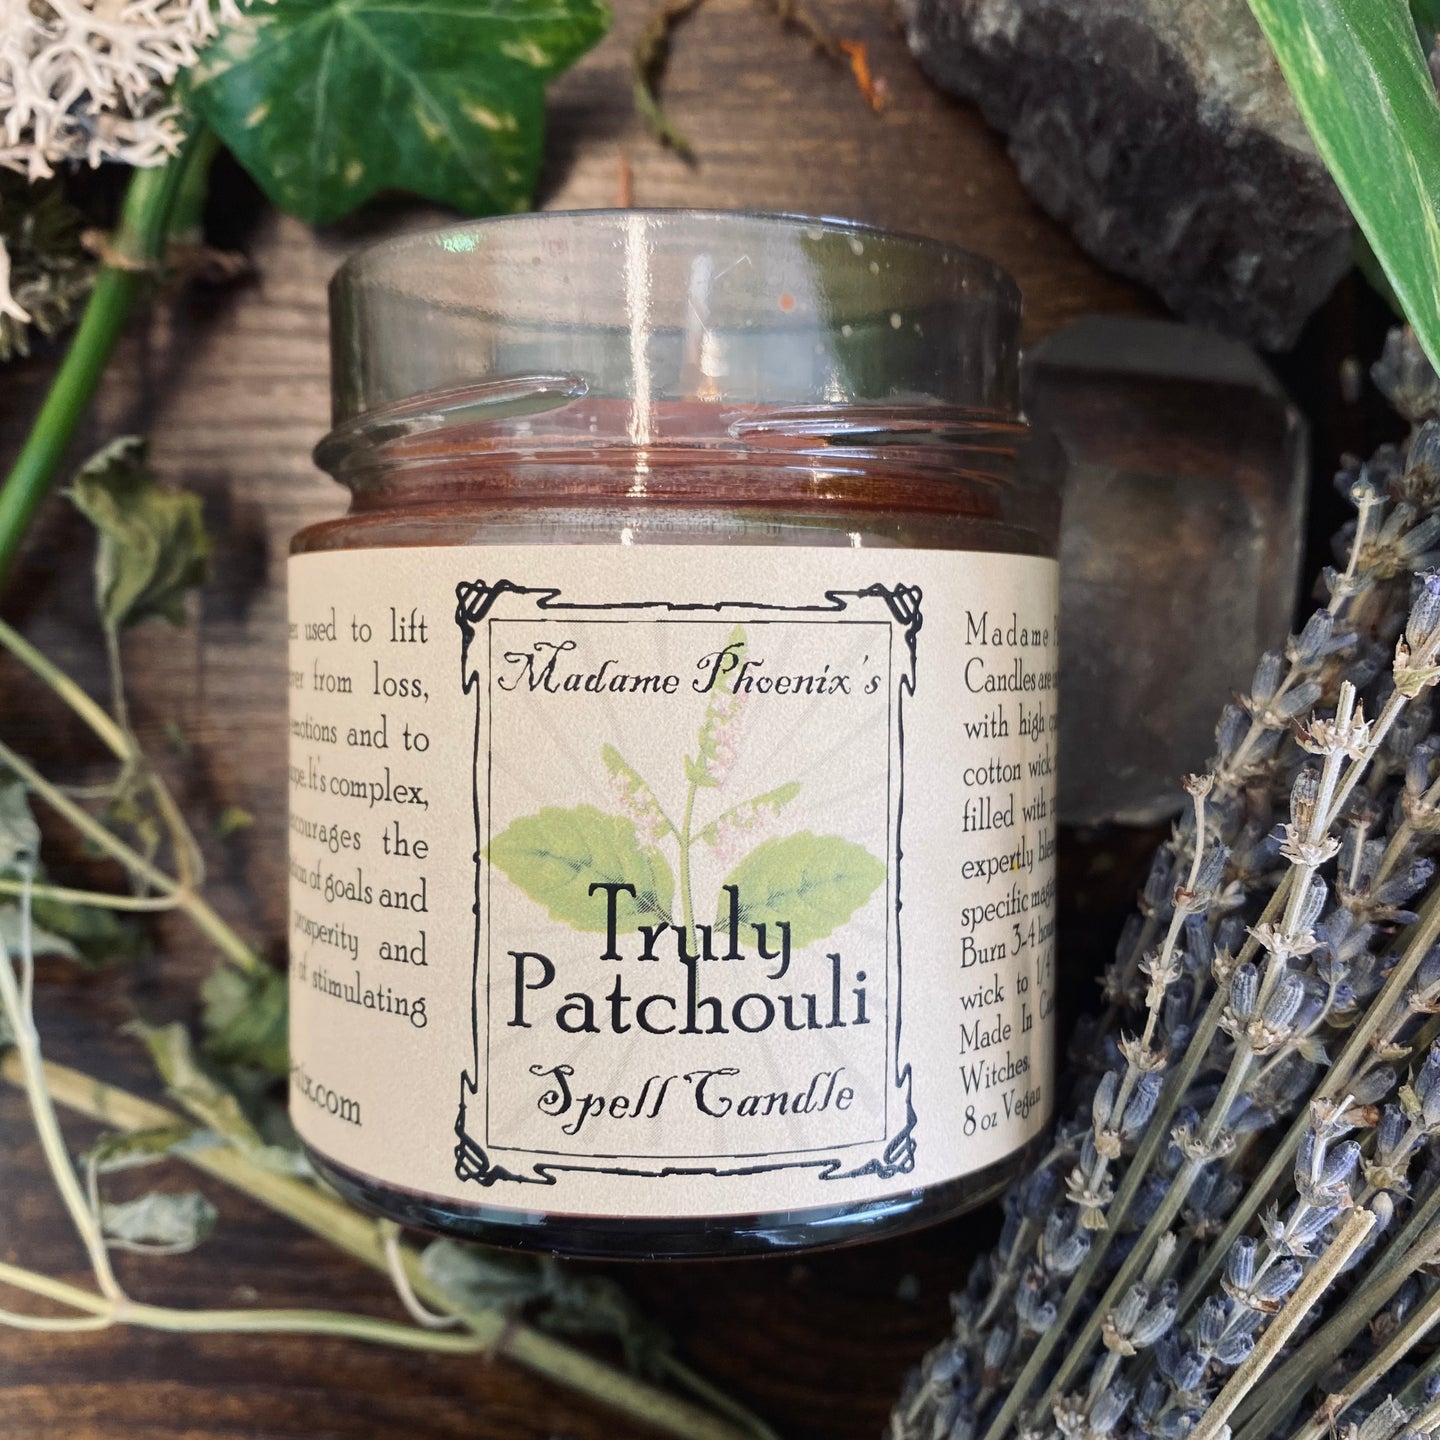 Patchouli Love & Prosperity All Natural Herbal Blessing Candle